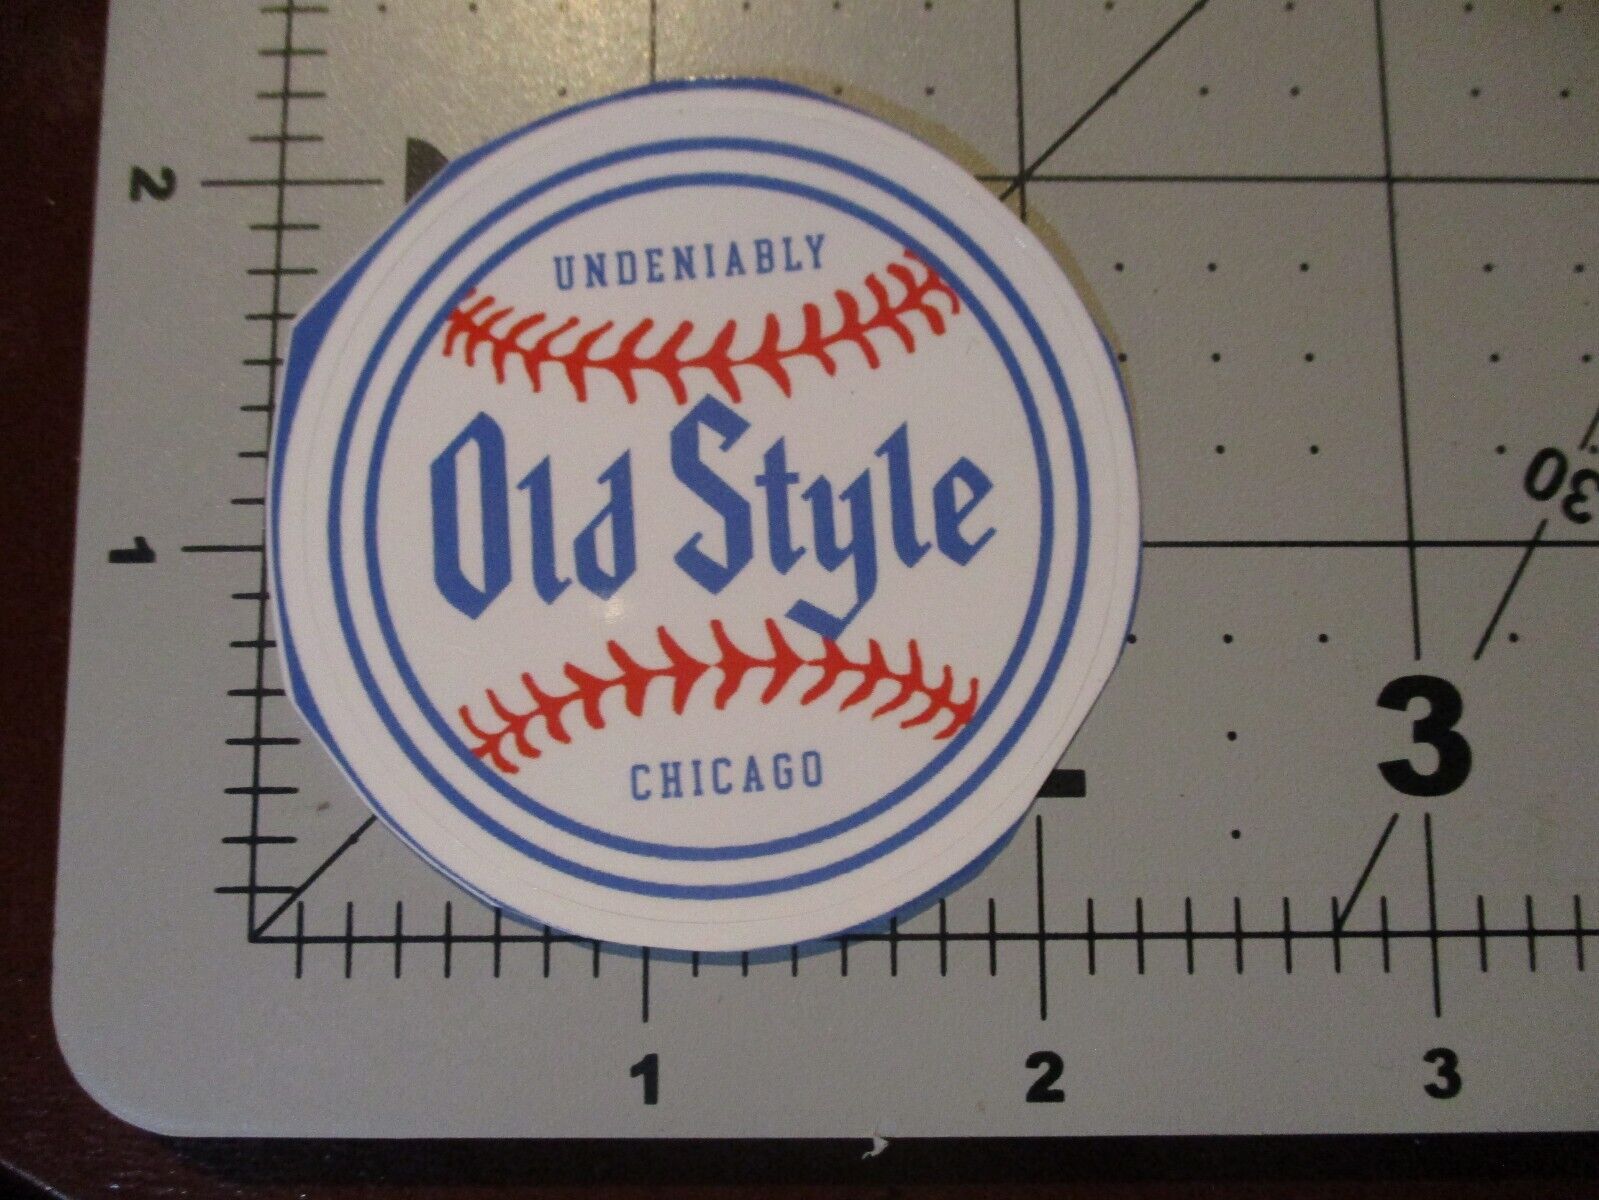 OLD STYLE chicago baseball logo STICKER decal craft beer brewery brewing